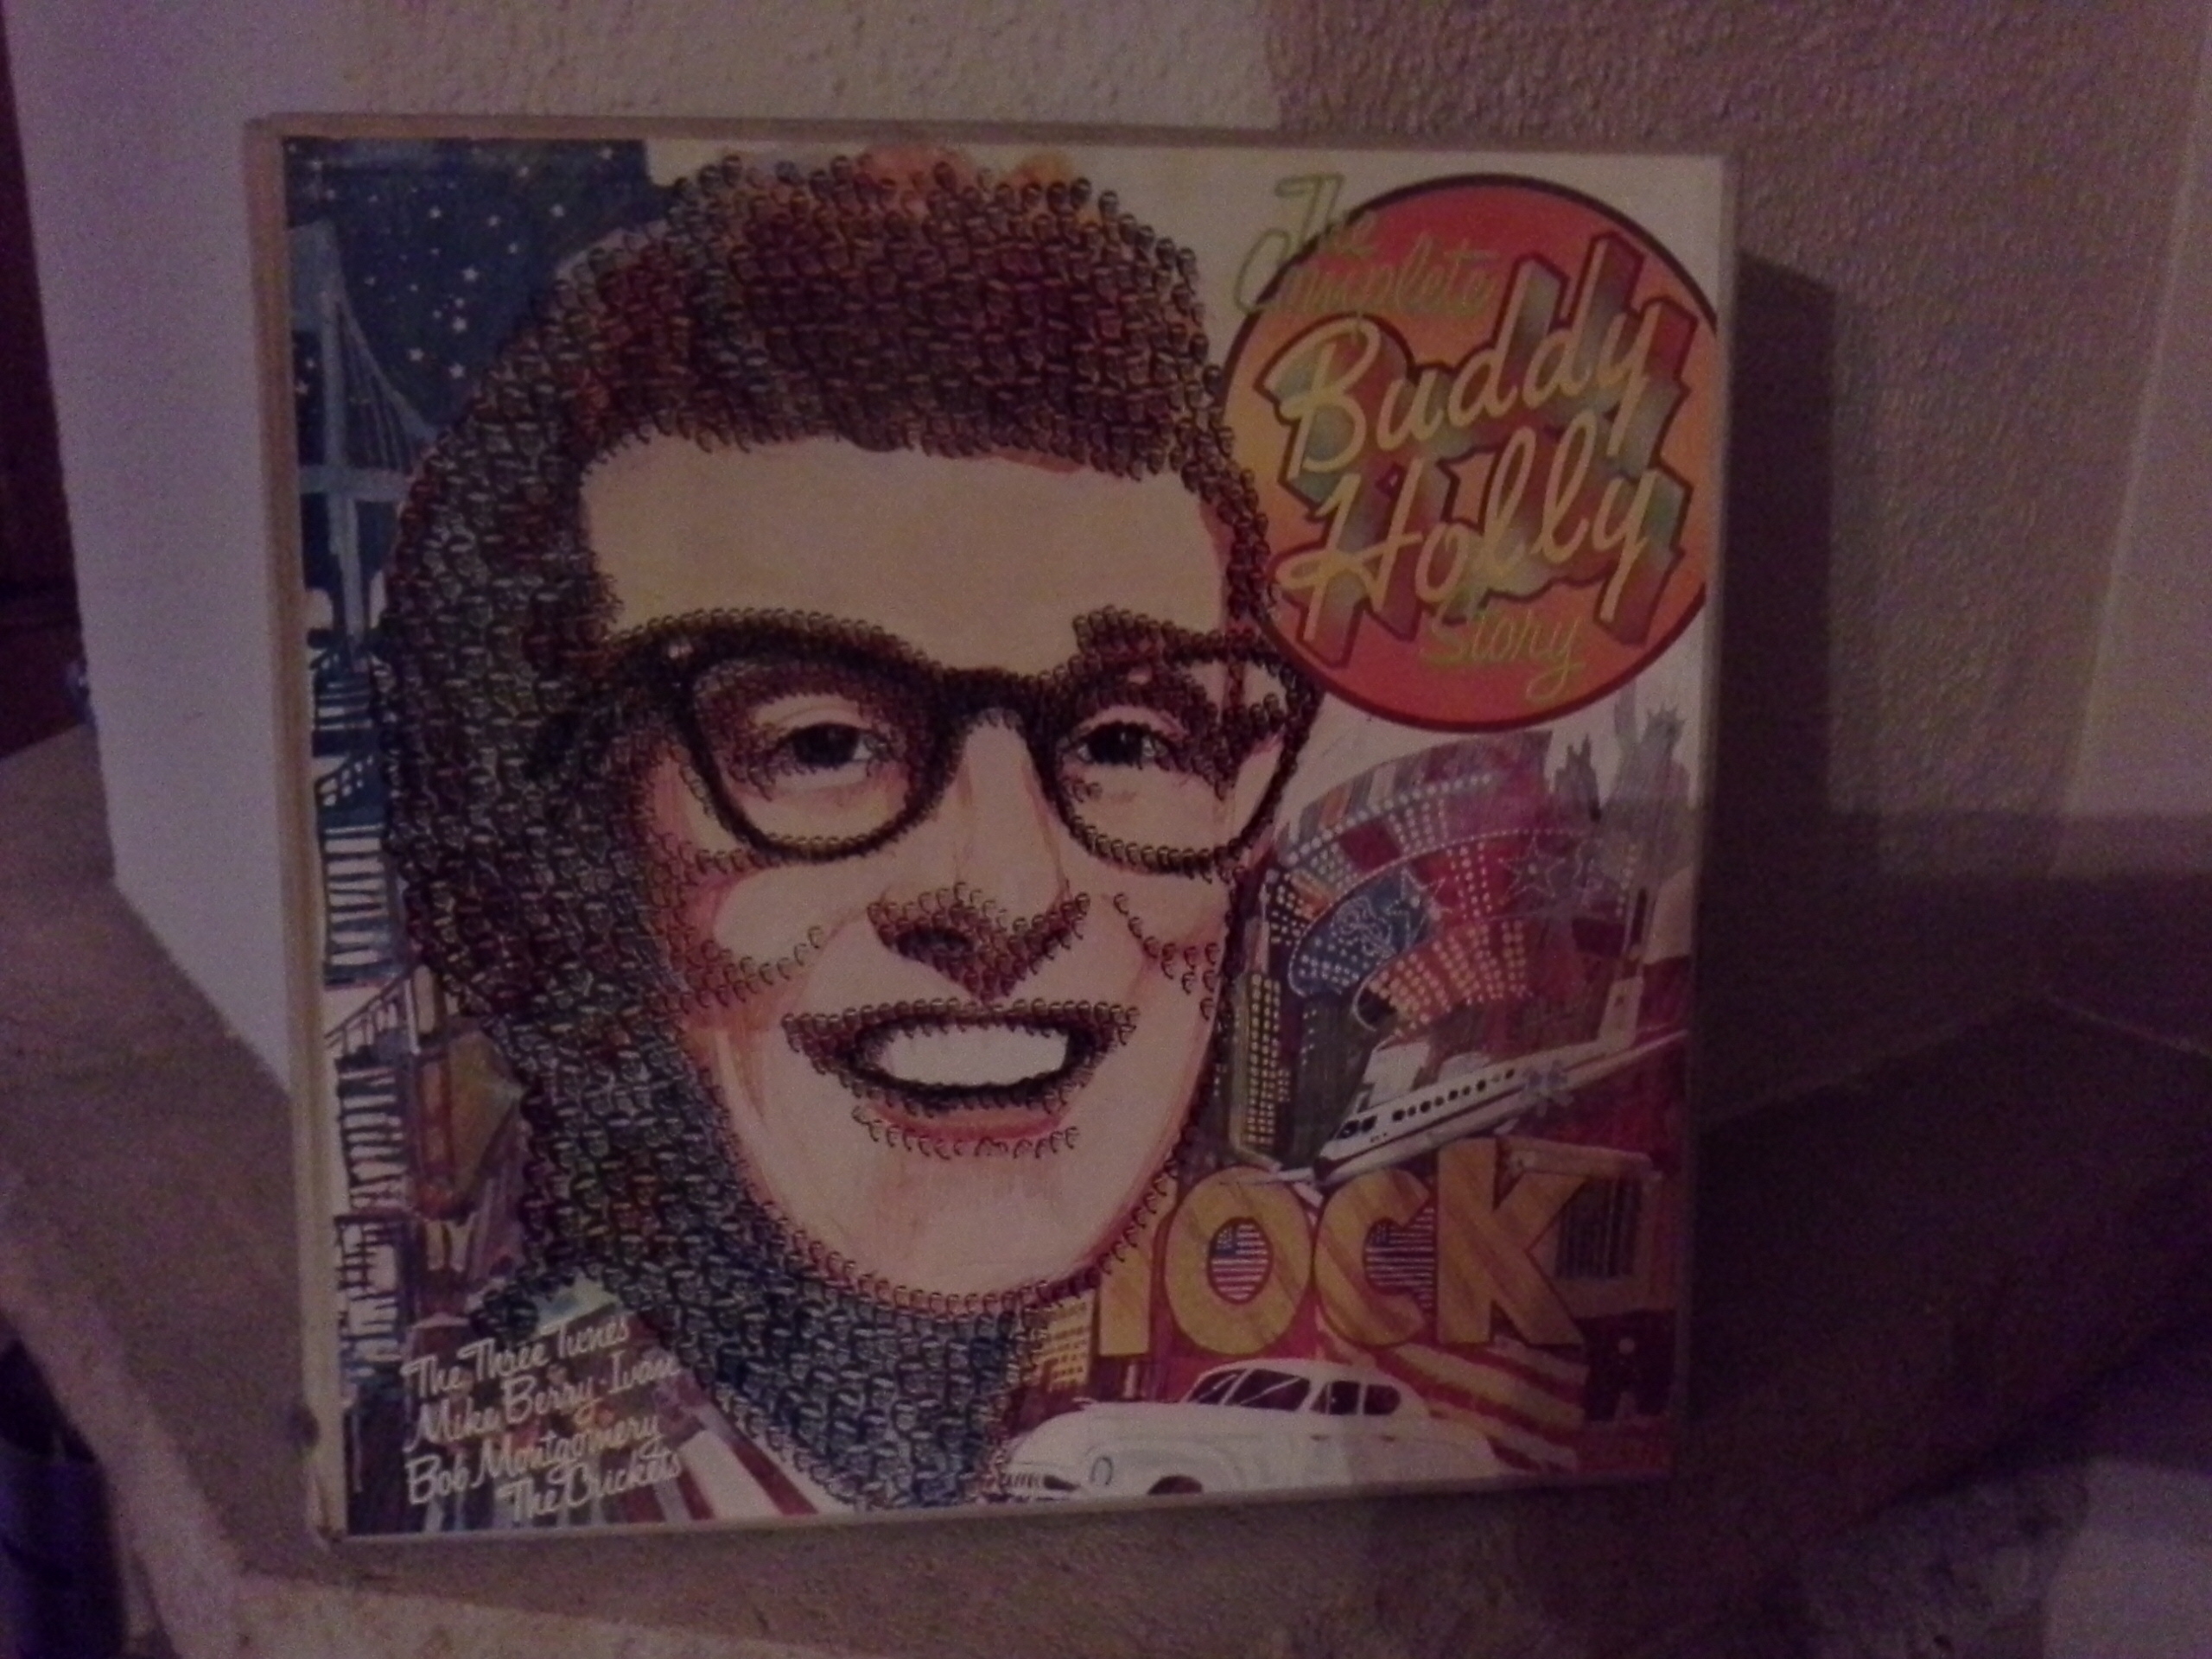 The Complete Buddy Holly Story